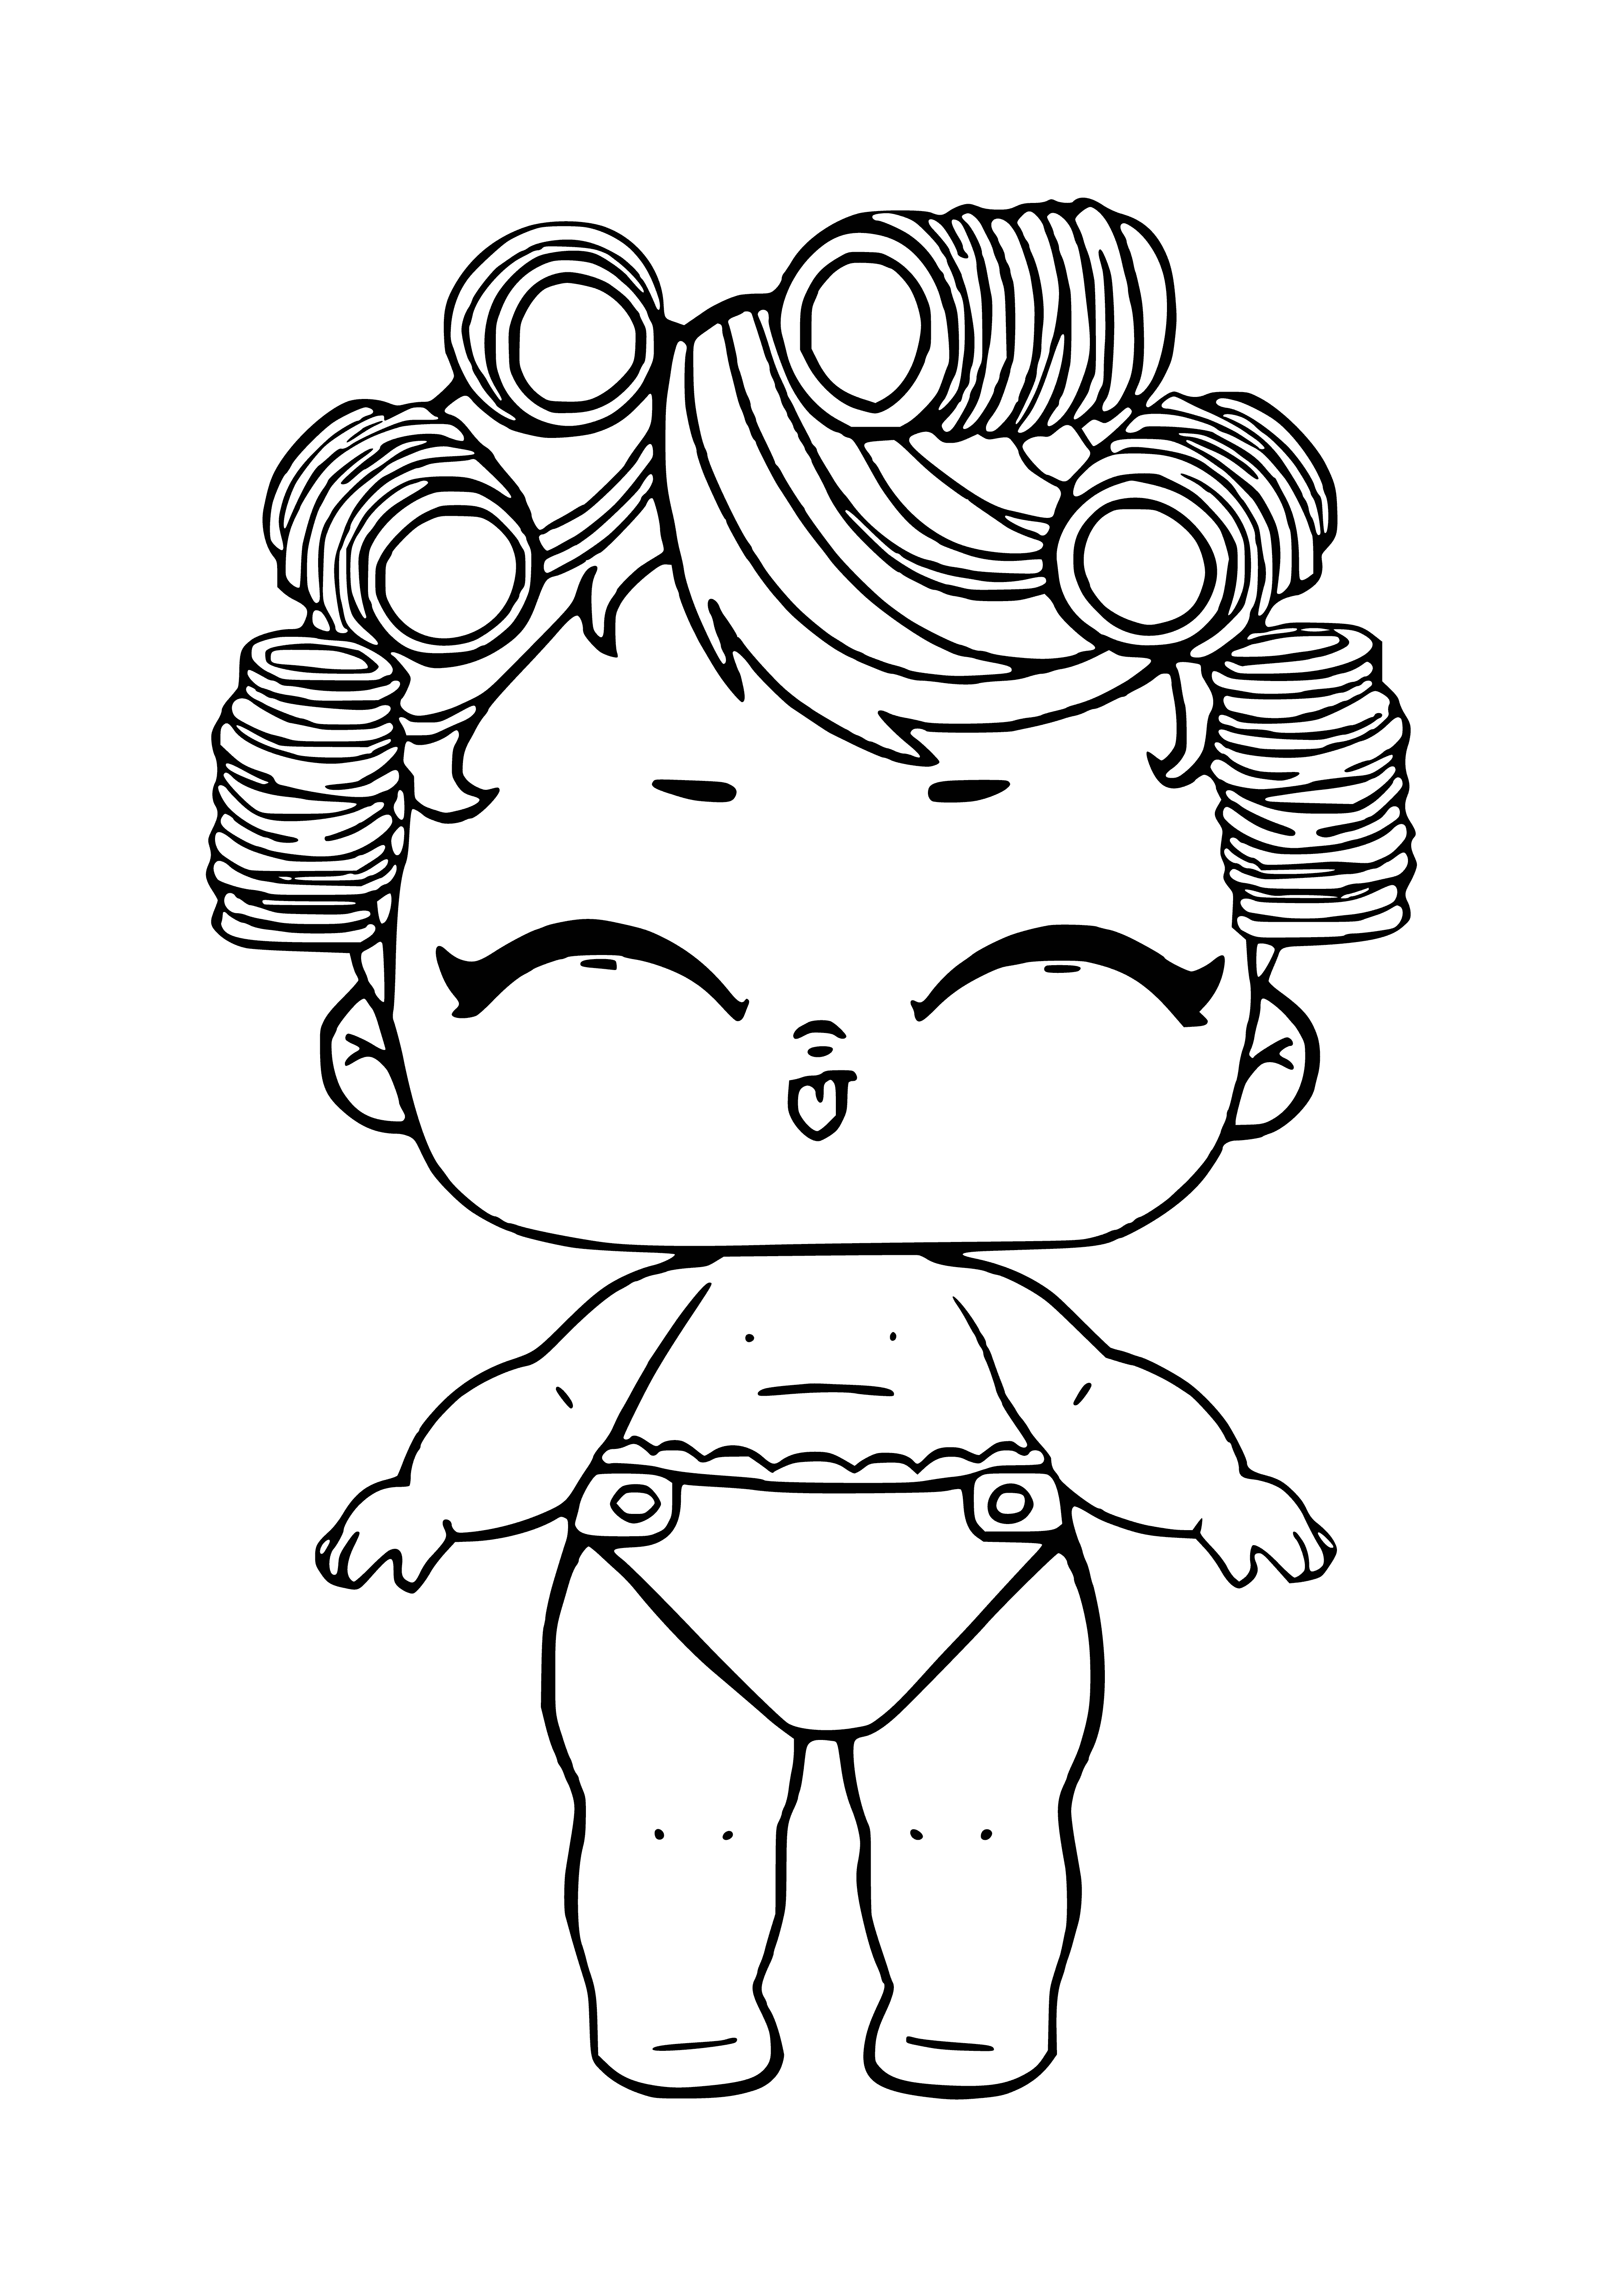 coloring page: Robot baby toy w/ white plastic body, blue arms and pink head. Press tummy to make baby noises. Blue and pink accents.